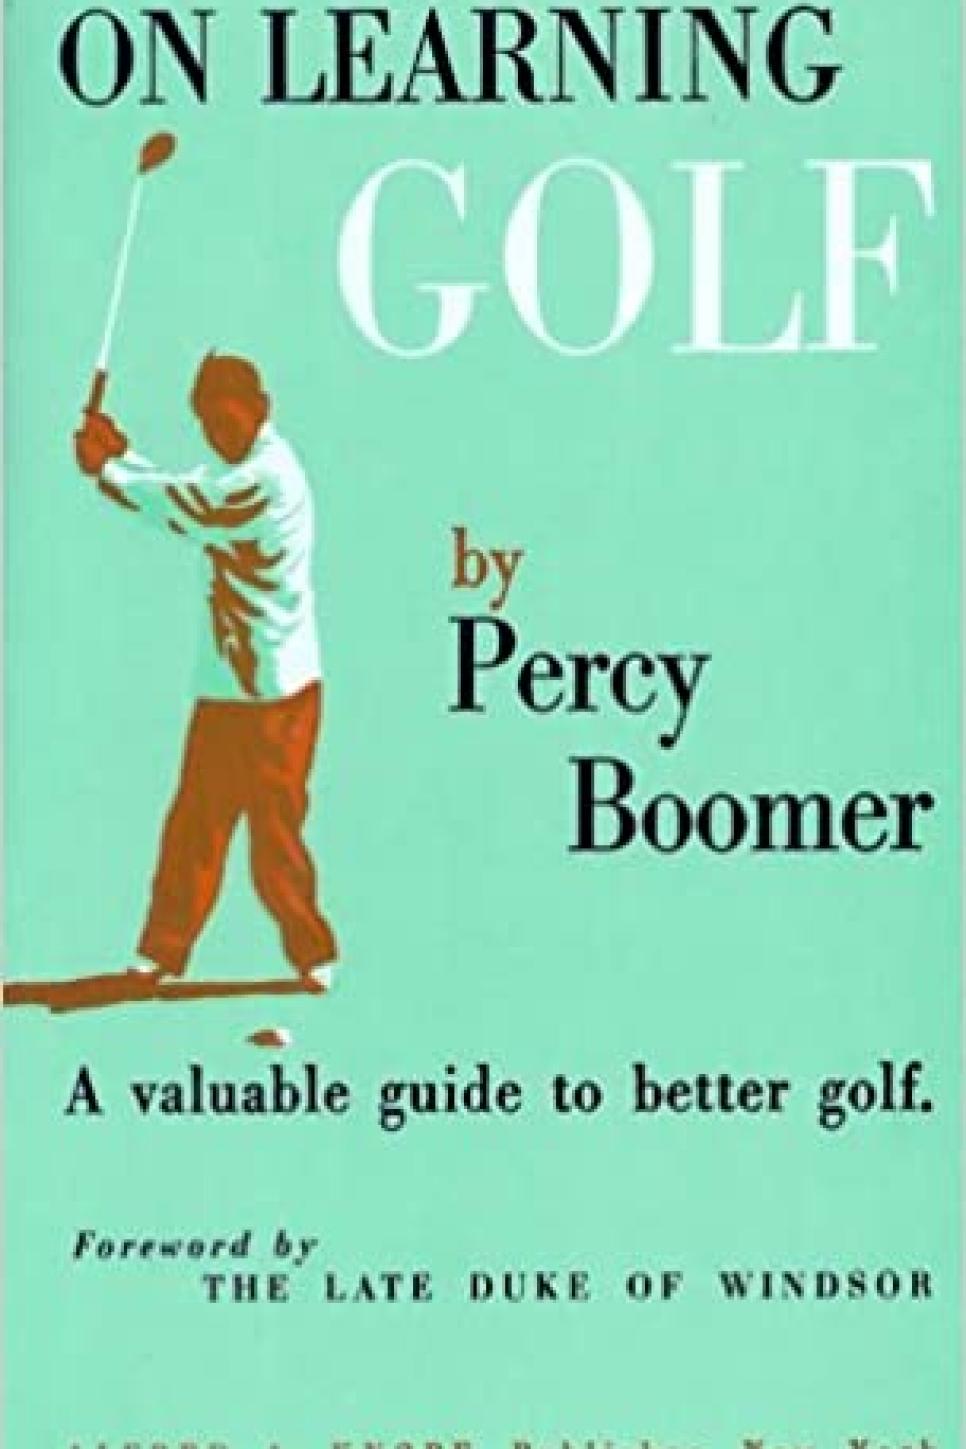 rx-amazonon-learning-golf-by-percy-boomer-1946.jpeg